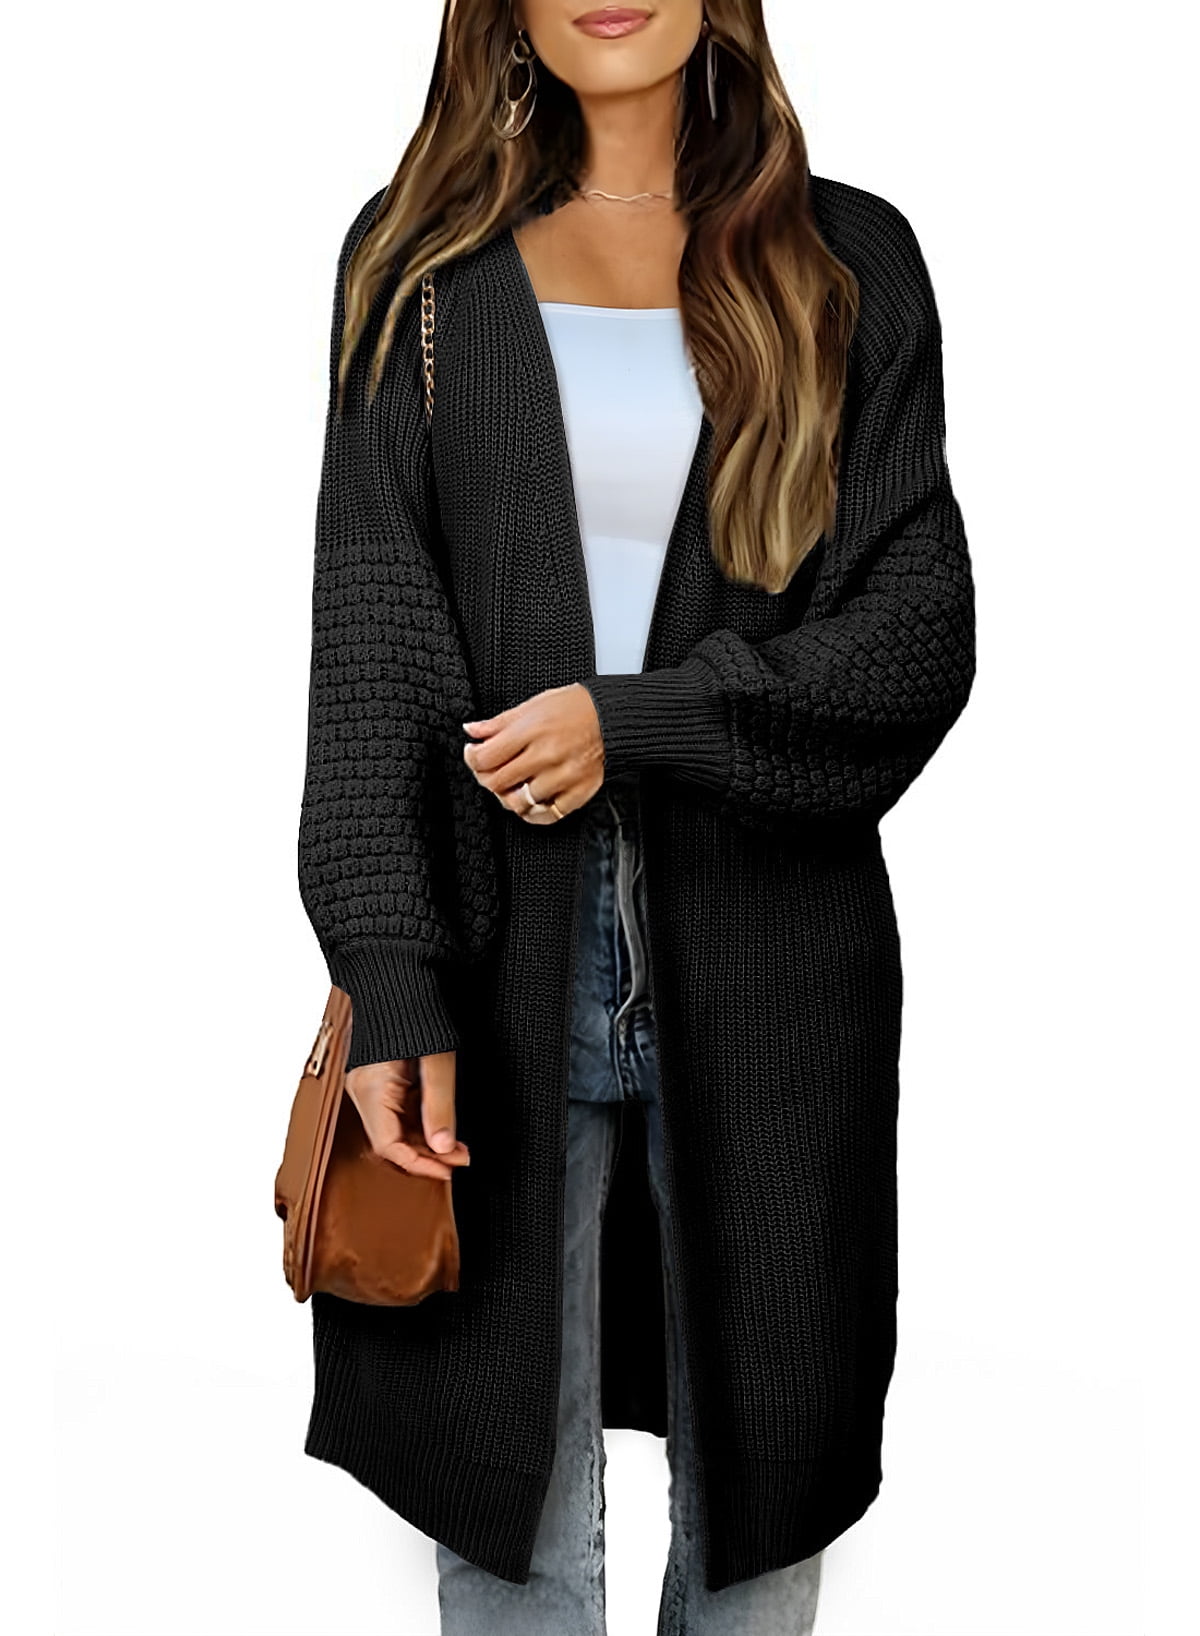 SHEWIN Womens Sweaters Cardigan Long Sleeve Chunky Cable Knit Cardigans ...